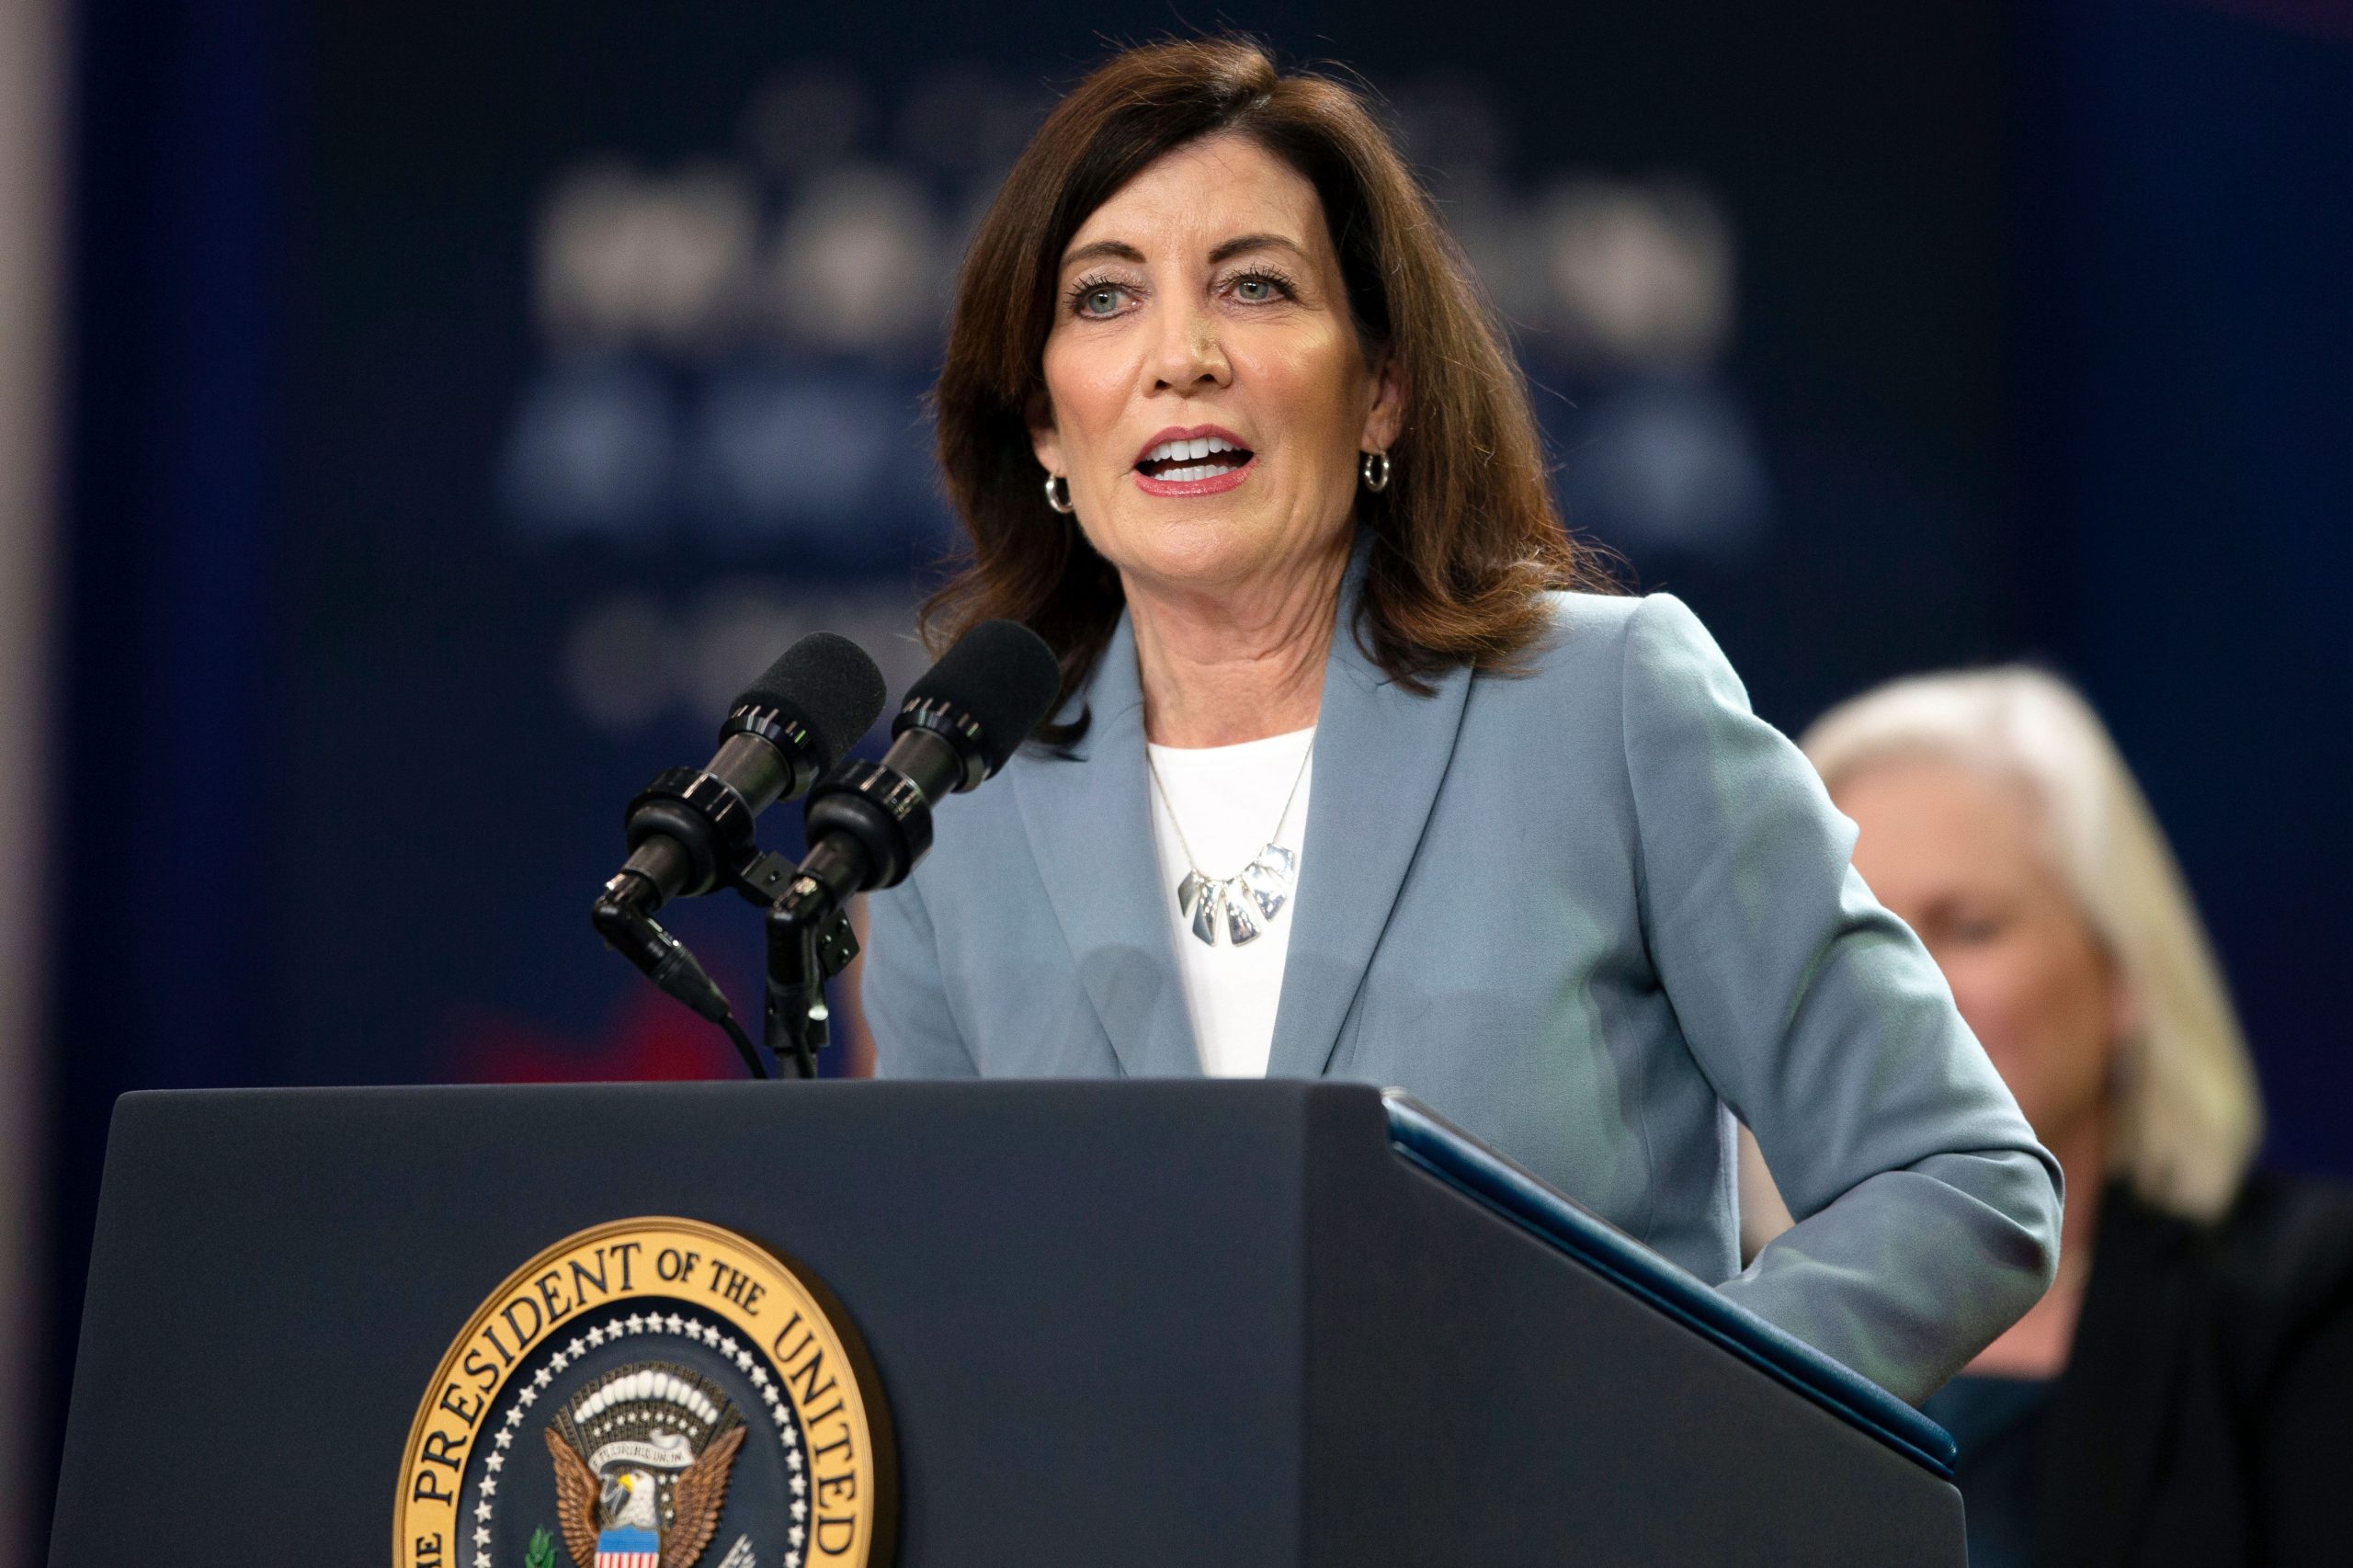 US midterms 2022: Kathy Hochul becomes New York’s first woman governor